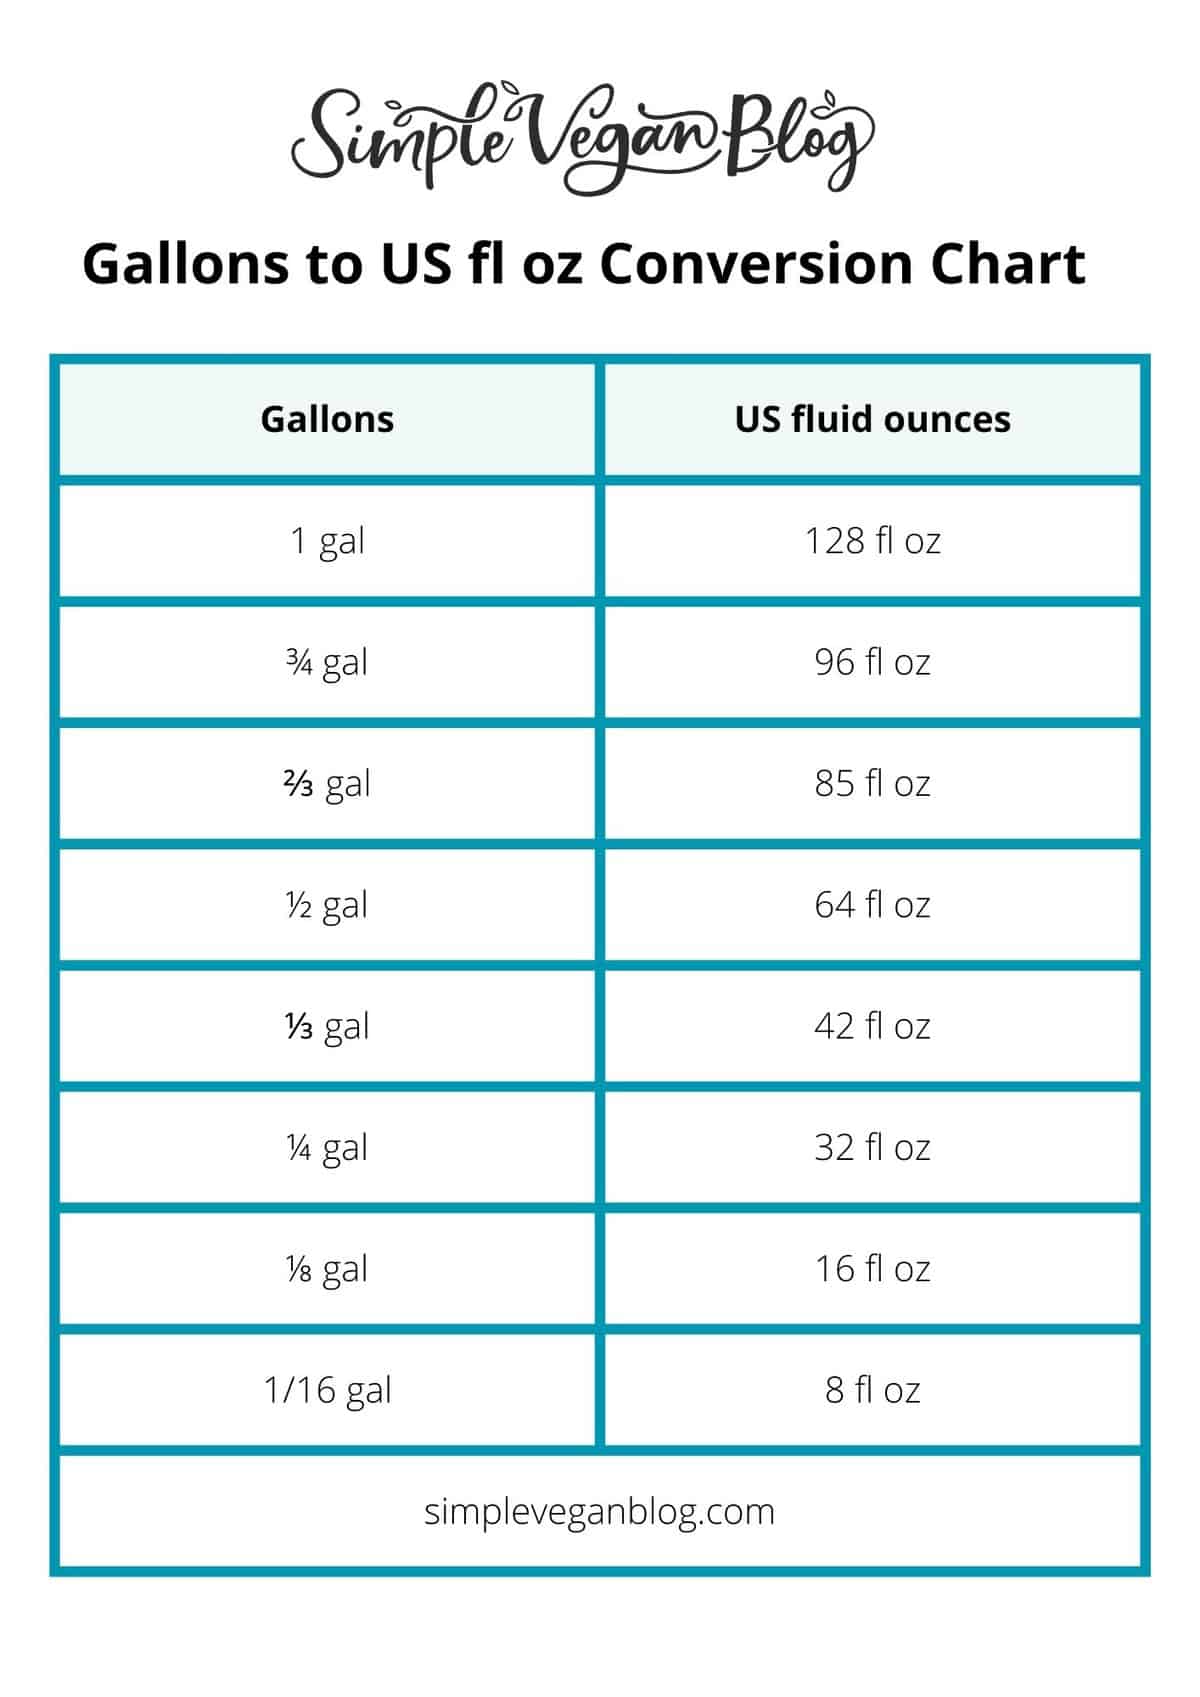 Gallons to US fluid ounces conversion chart.